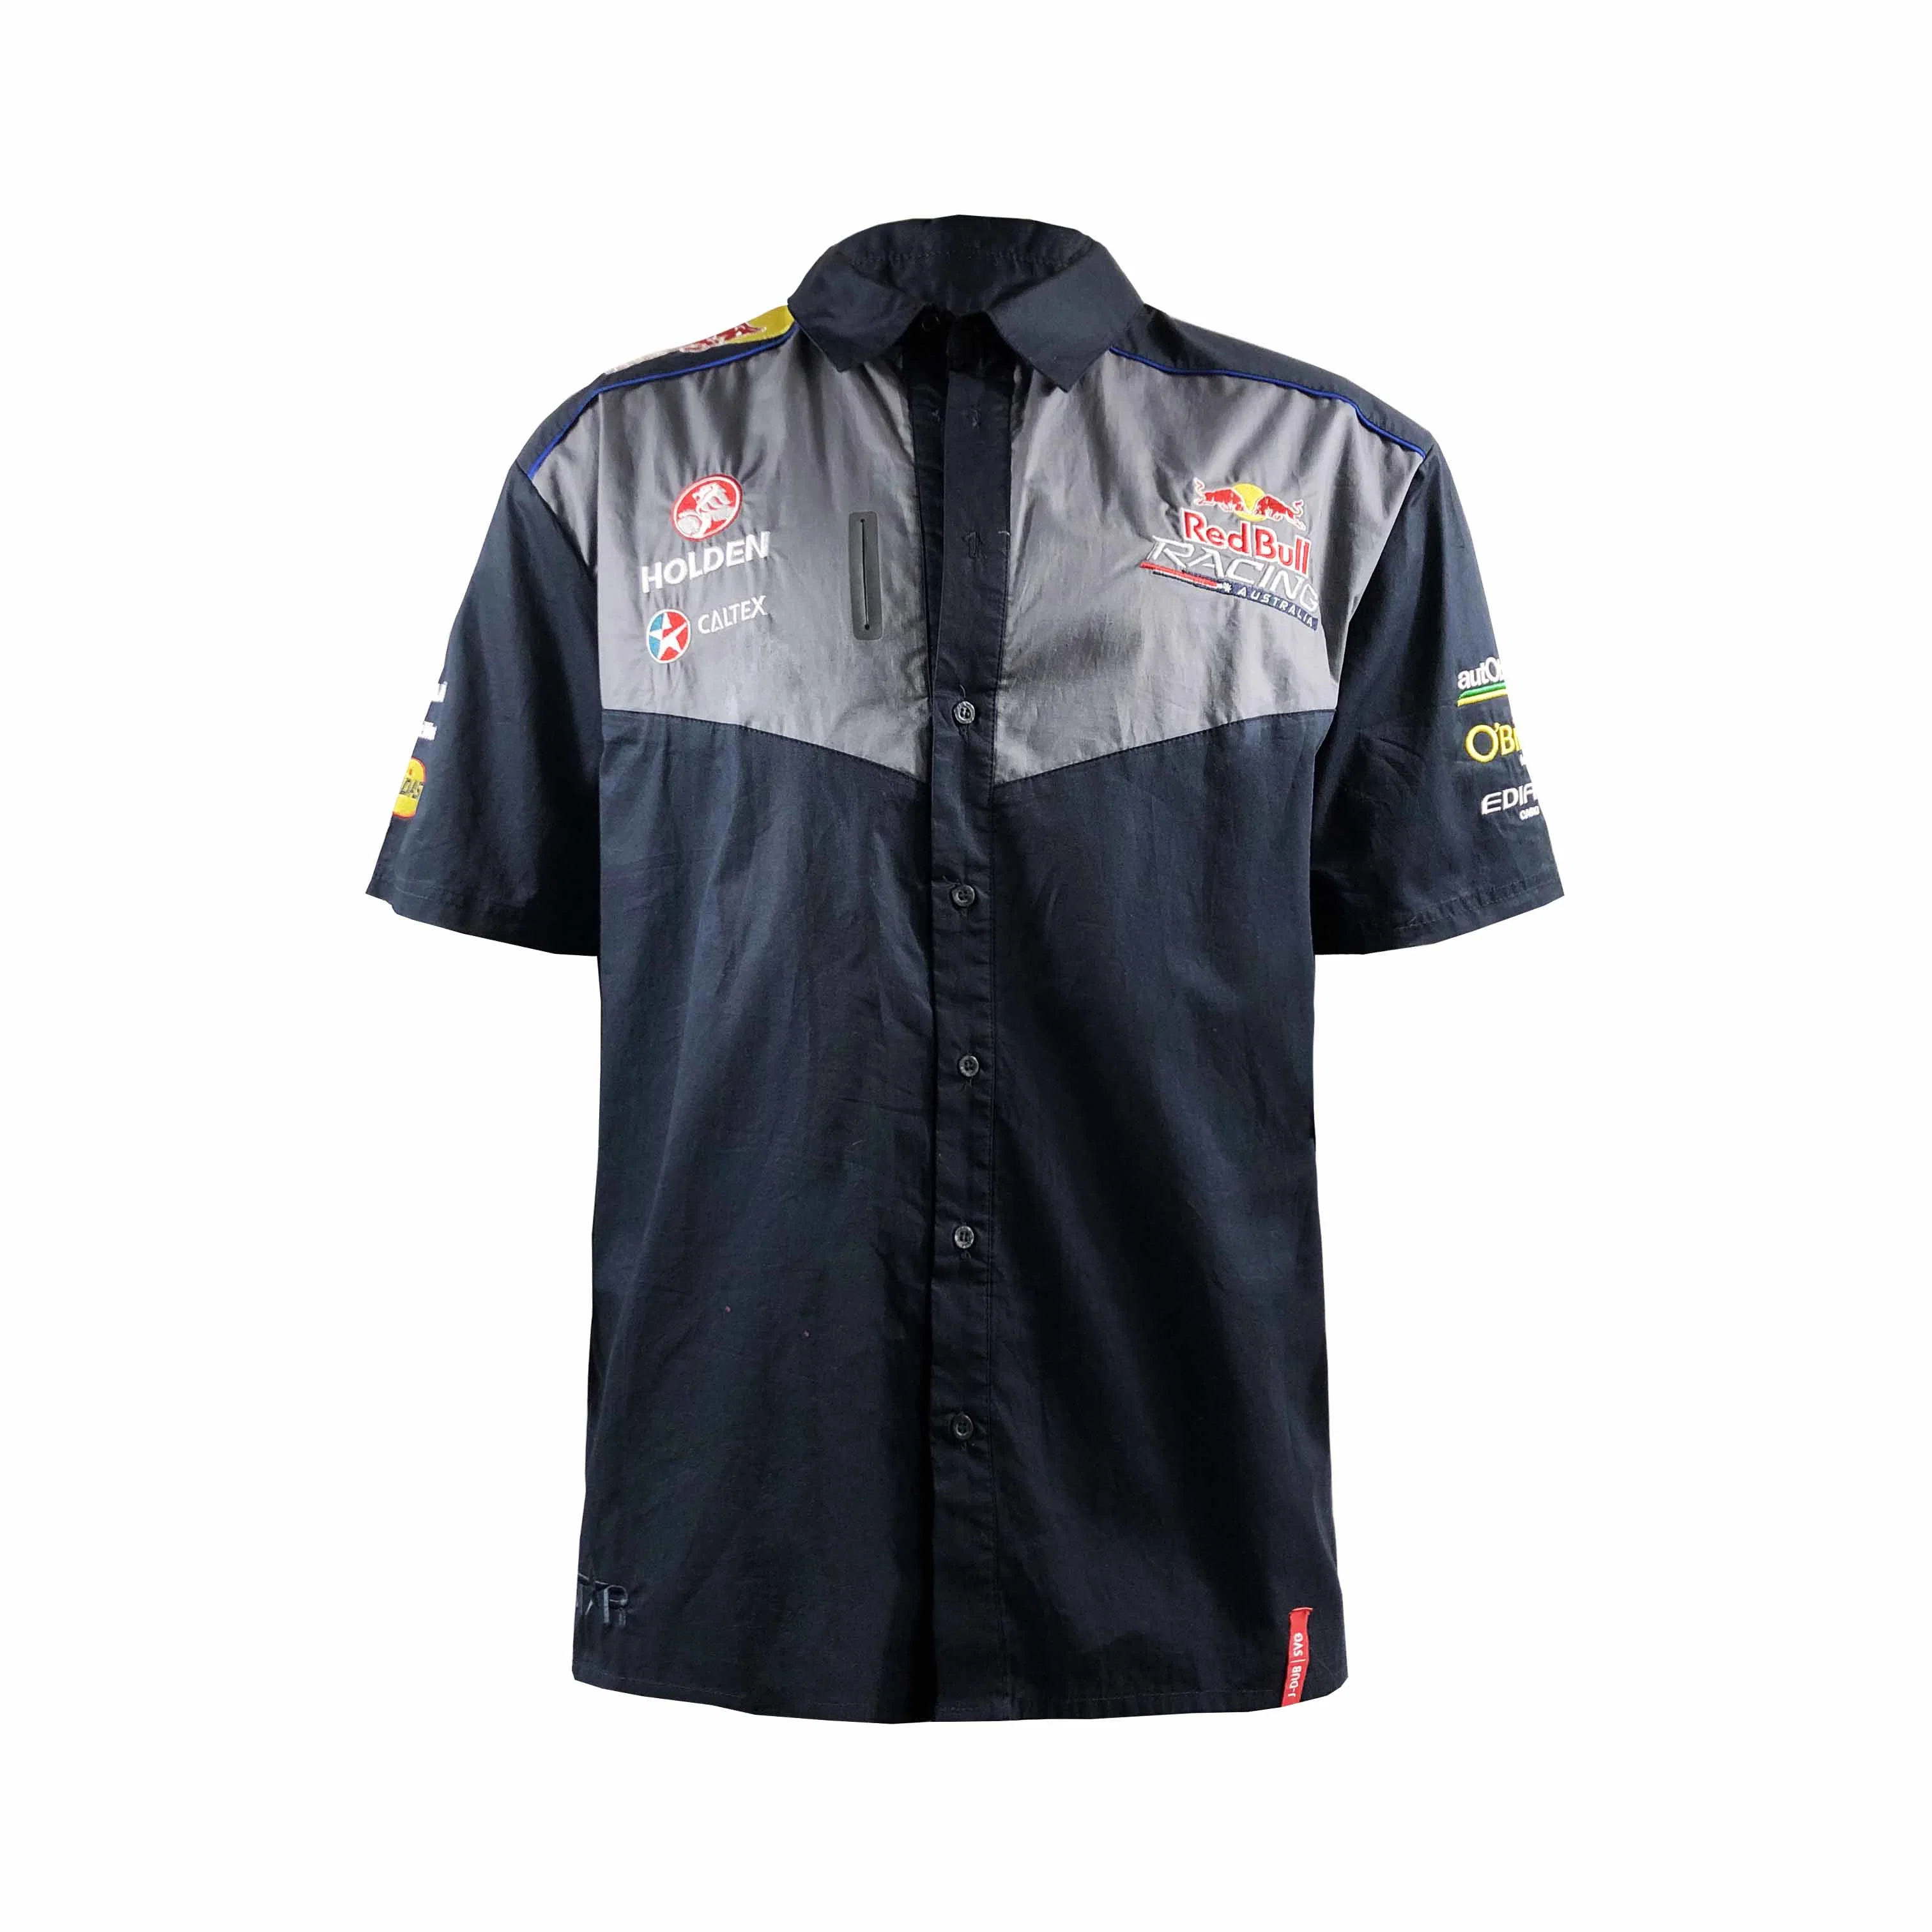 Custom Red Bull Team Wear Dry Fit Unisex Sports Promotion Sublimation Shirt